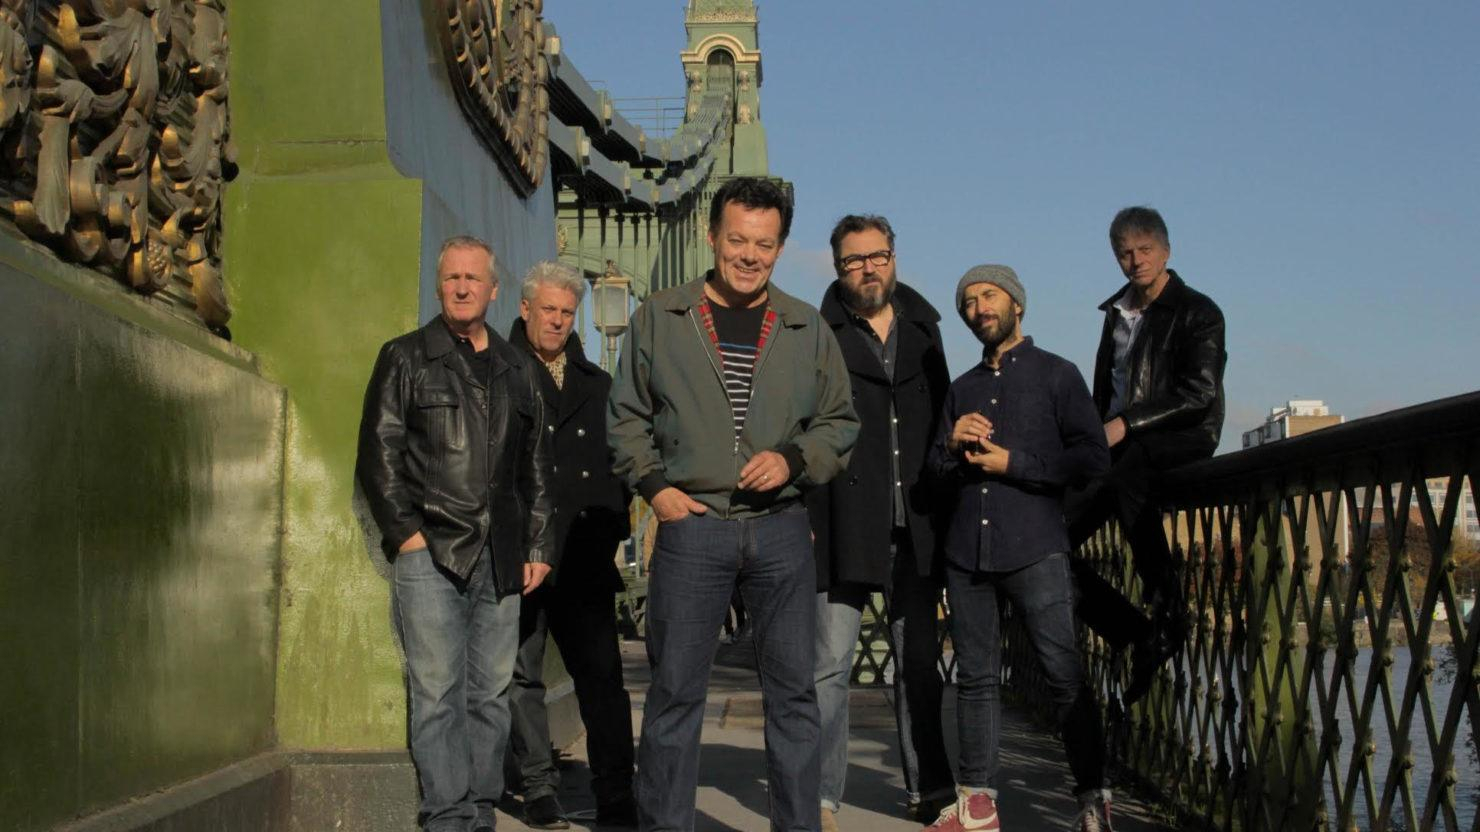 The James Hunter Six Tour Dates And Concert Tickets